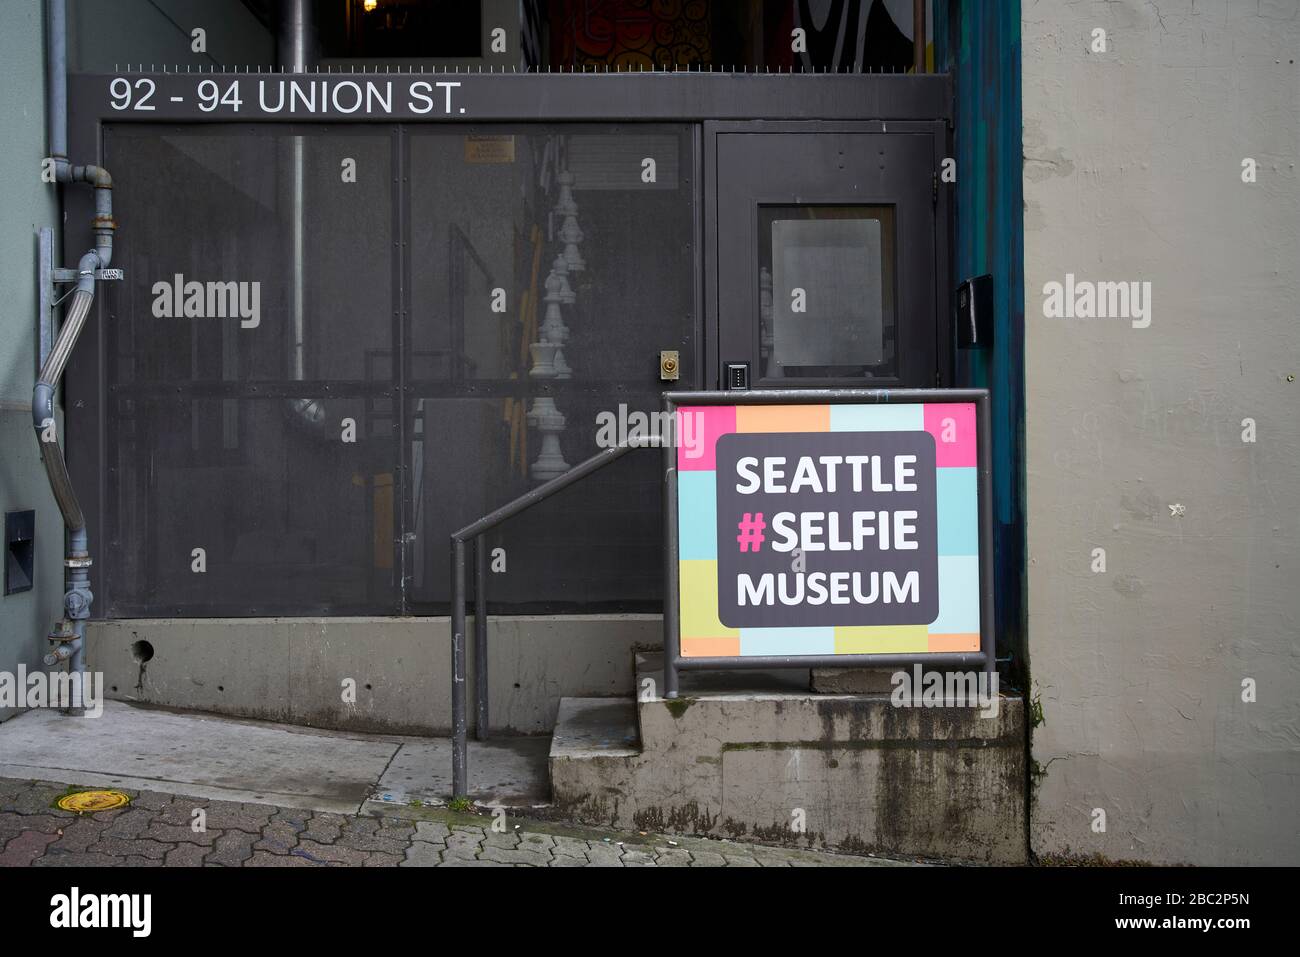 Entrance of the Seattle #selfie Museum Stock Photo